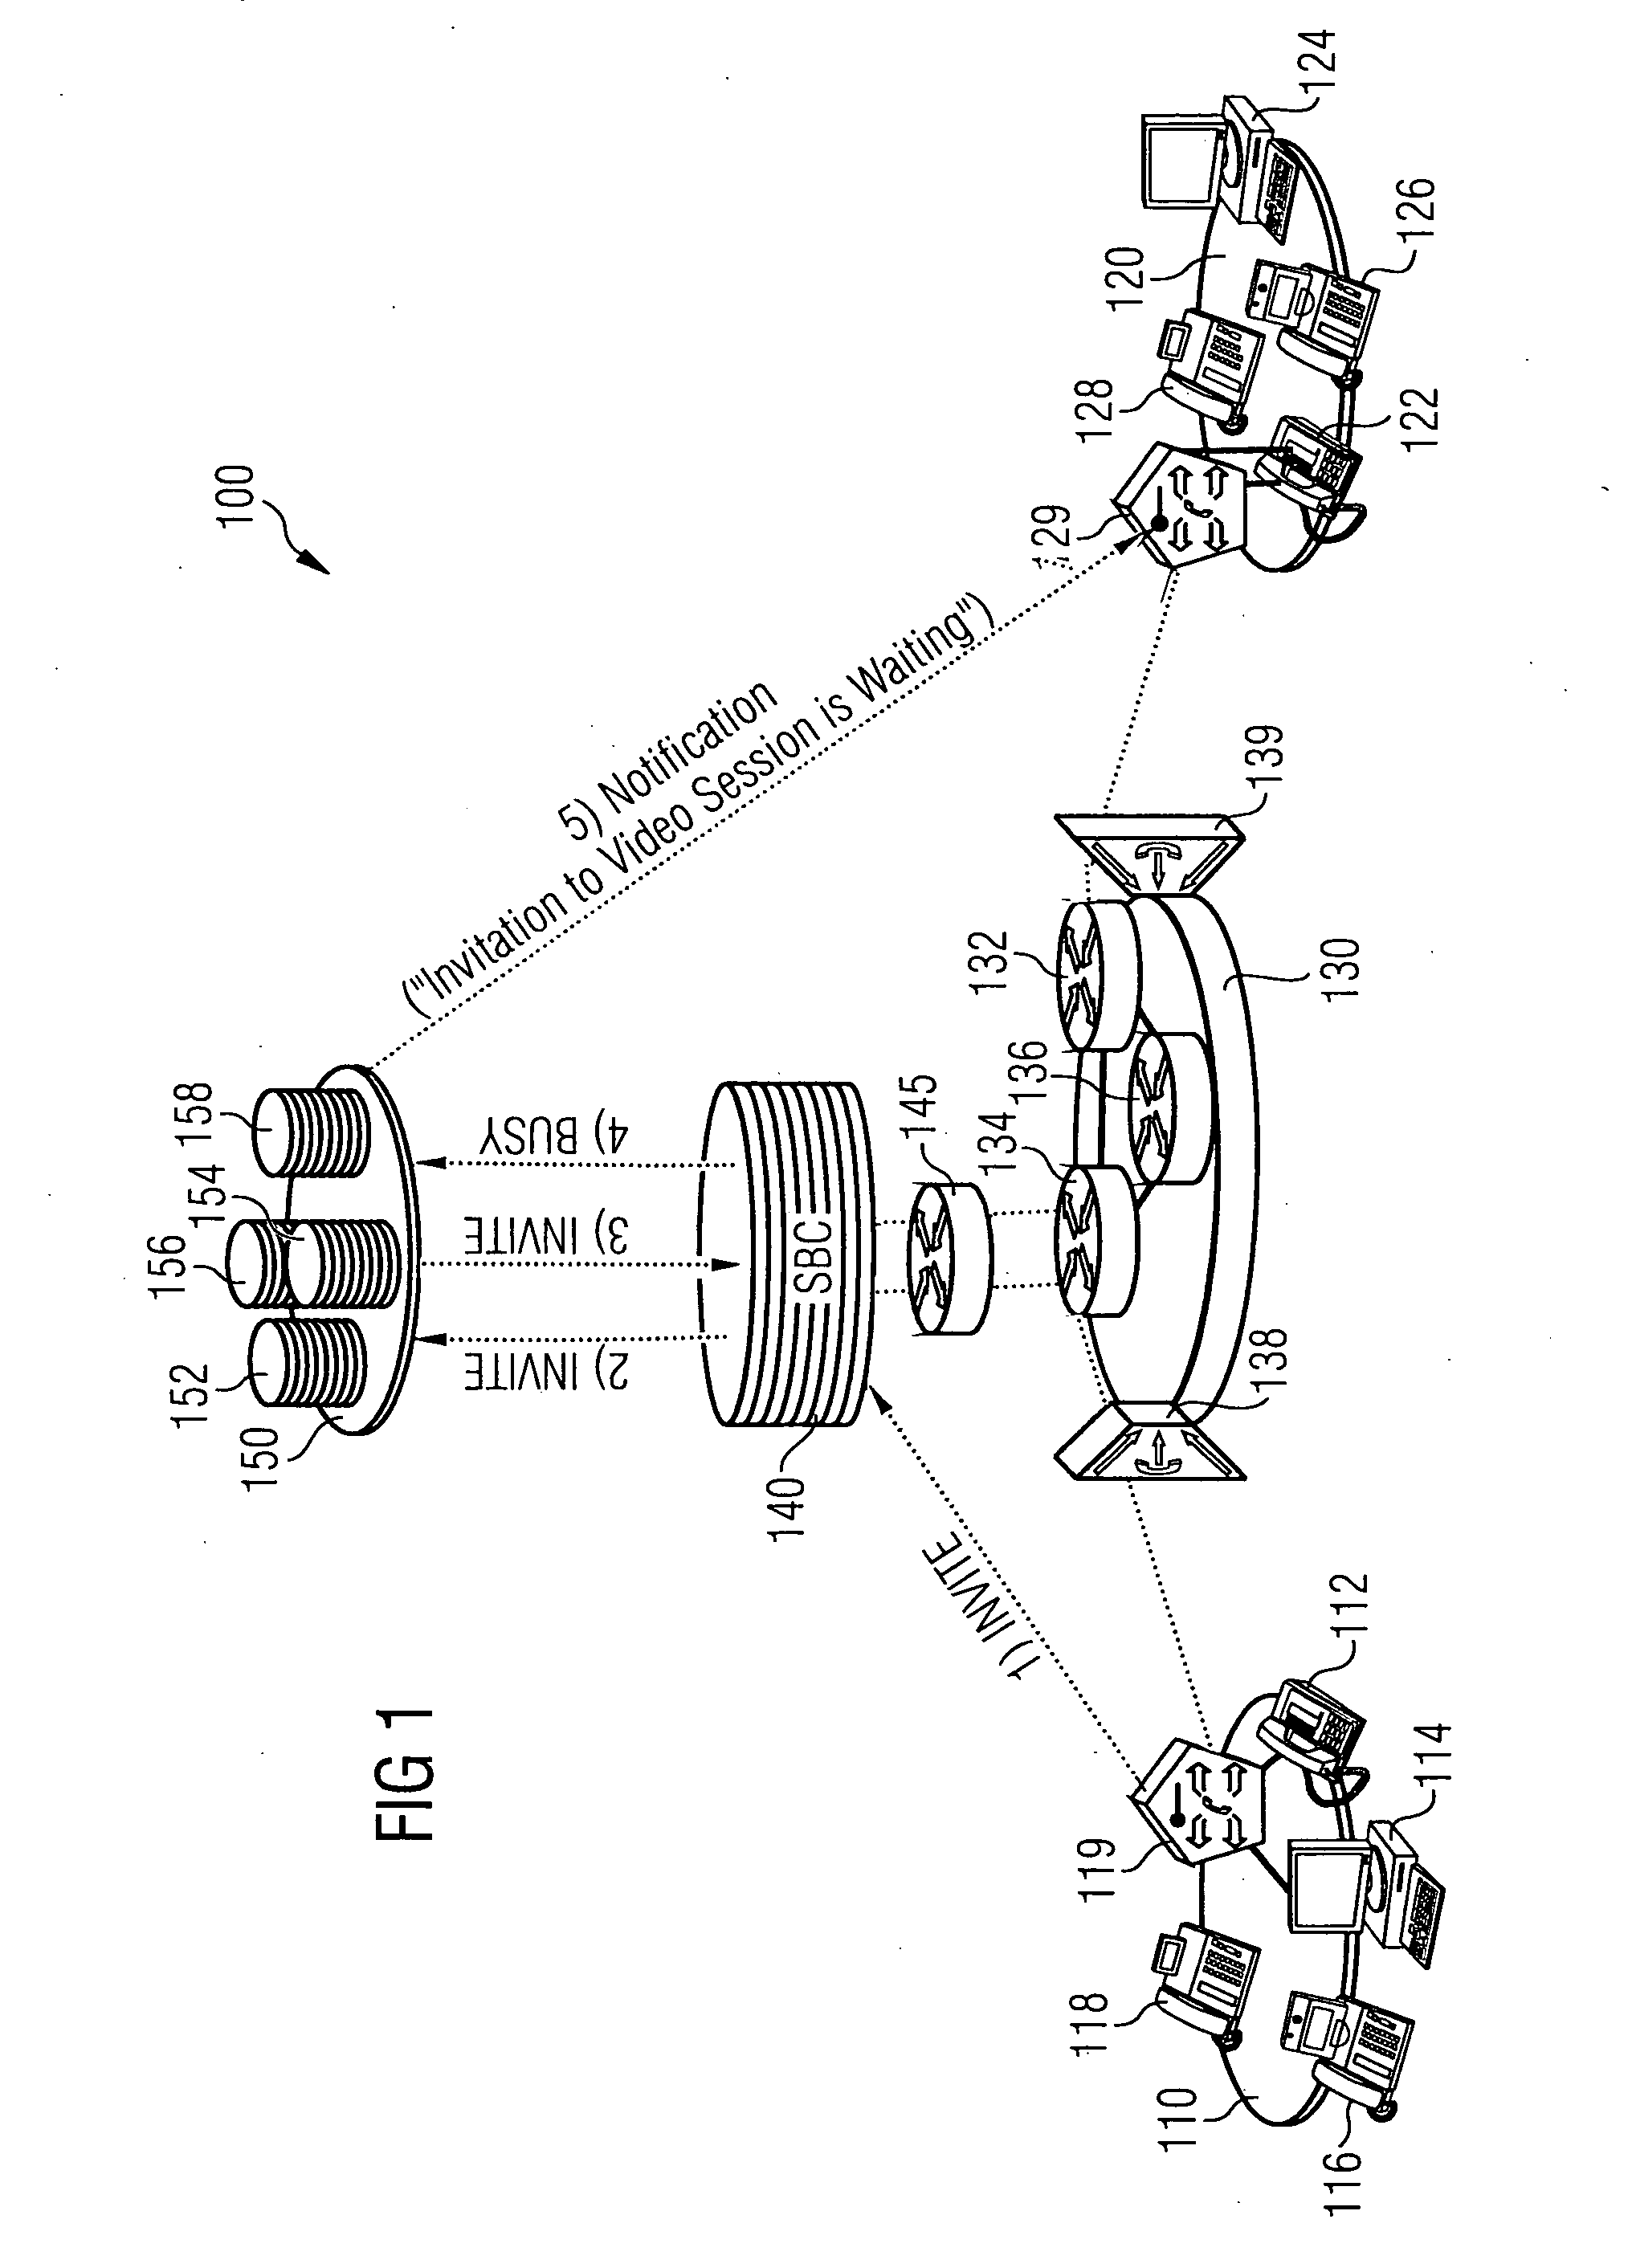 Network arrangement and method for handling sessions in a telecommunications network